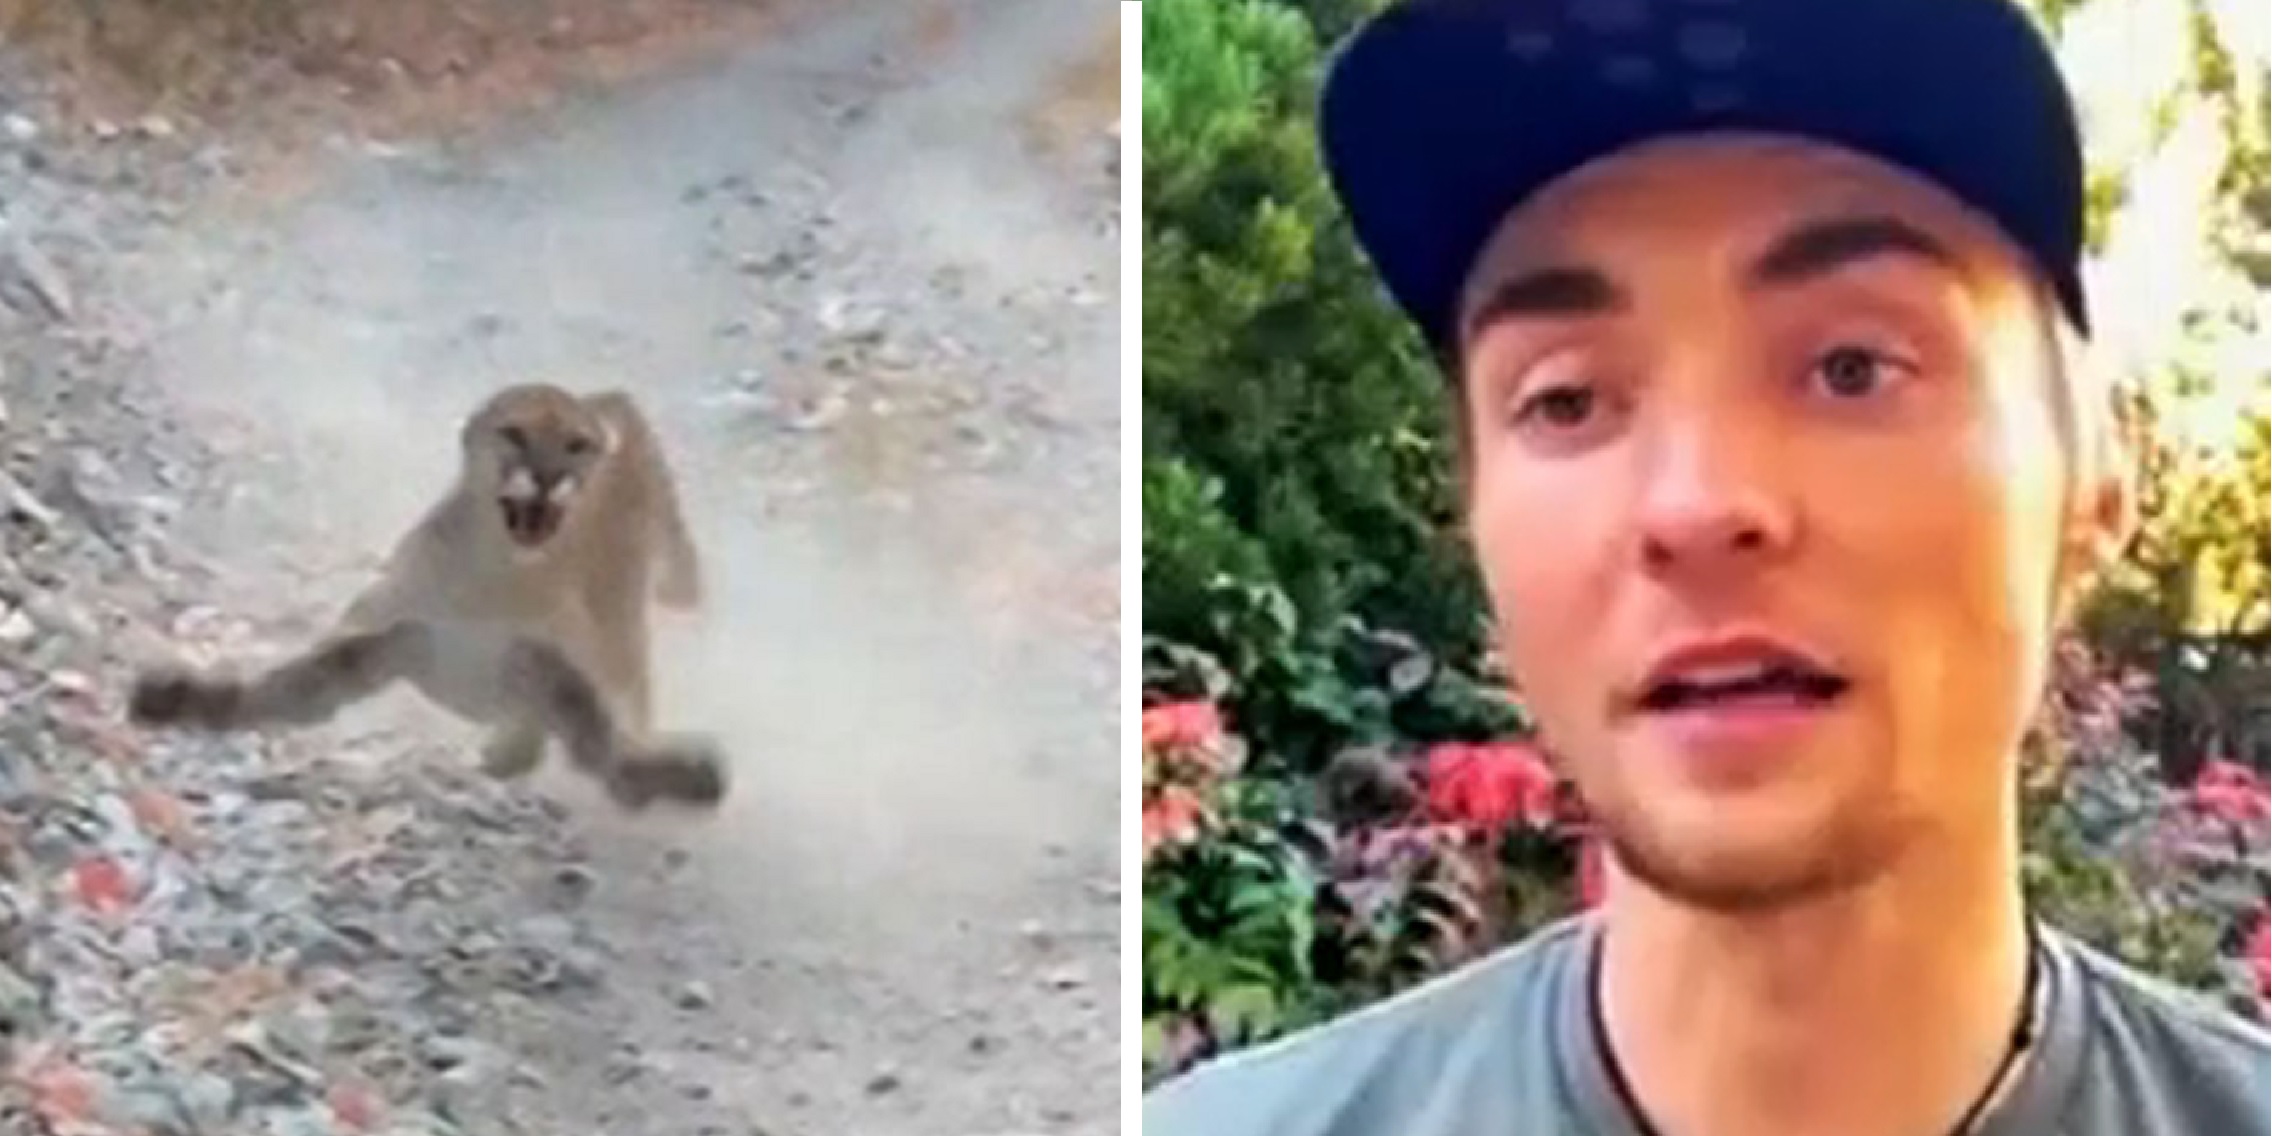 Man Survives After Being Chased By Wild Cougar For 6 Minutes, He Encountered While Jogging